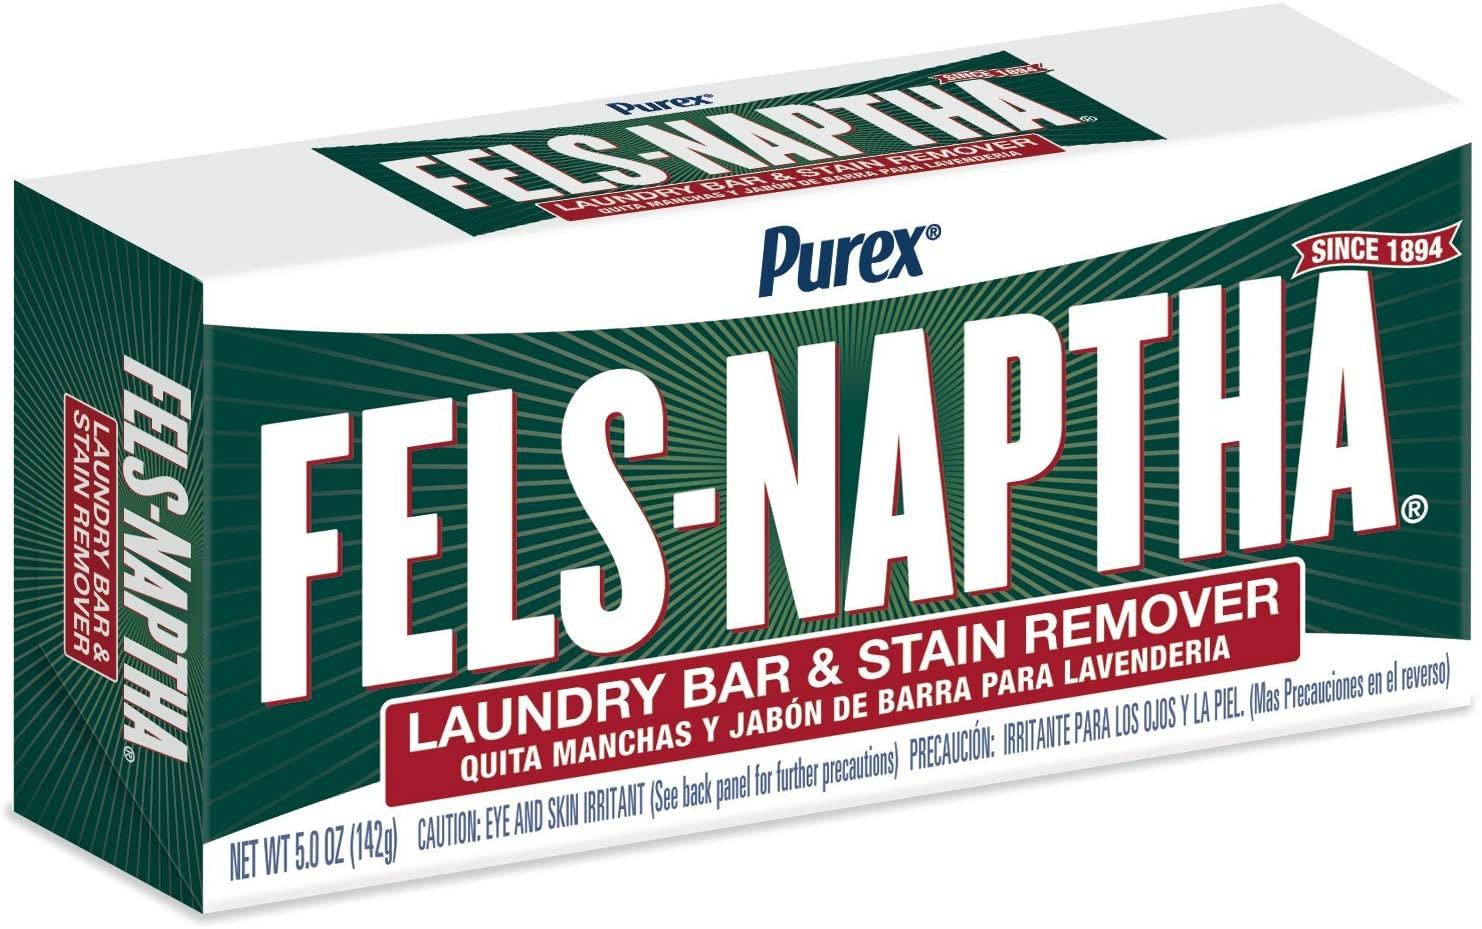 5oz Purex Fels-Naptha Laundry Bar & Stain Remover for $0.84 Shipped